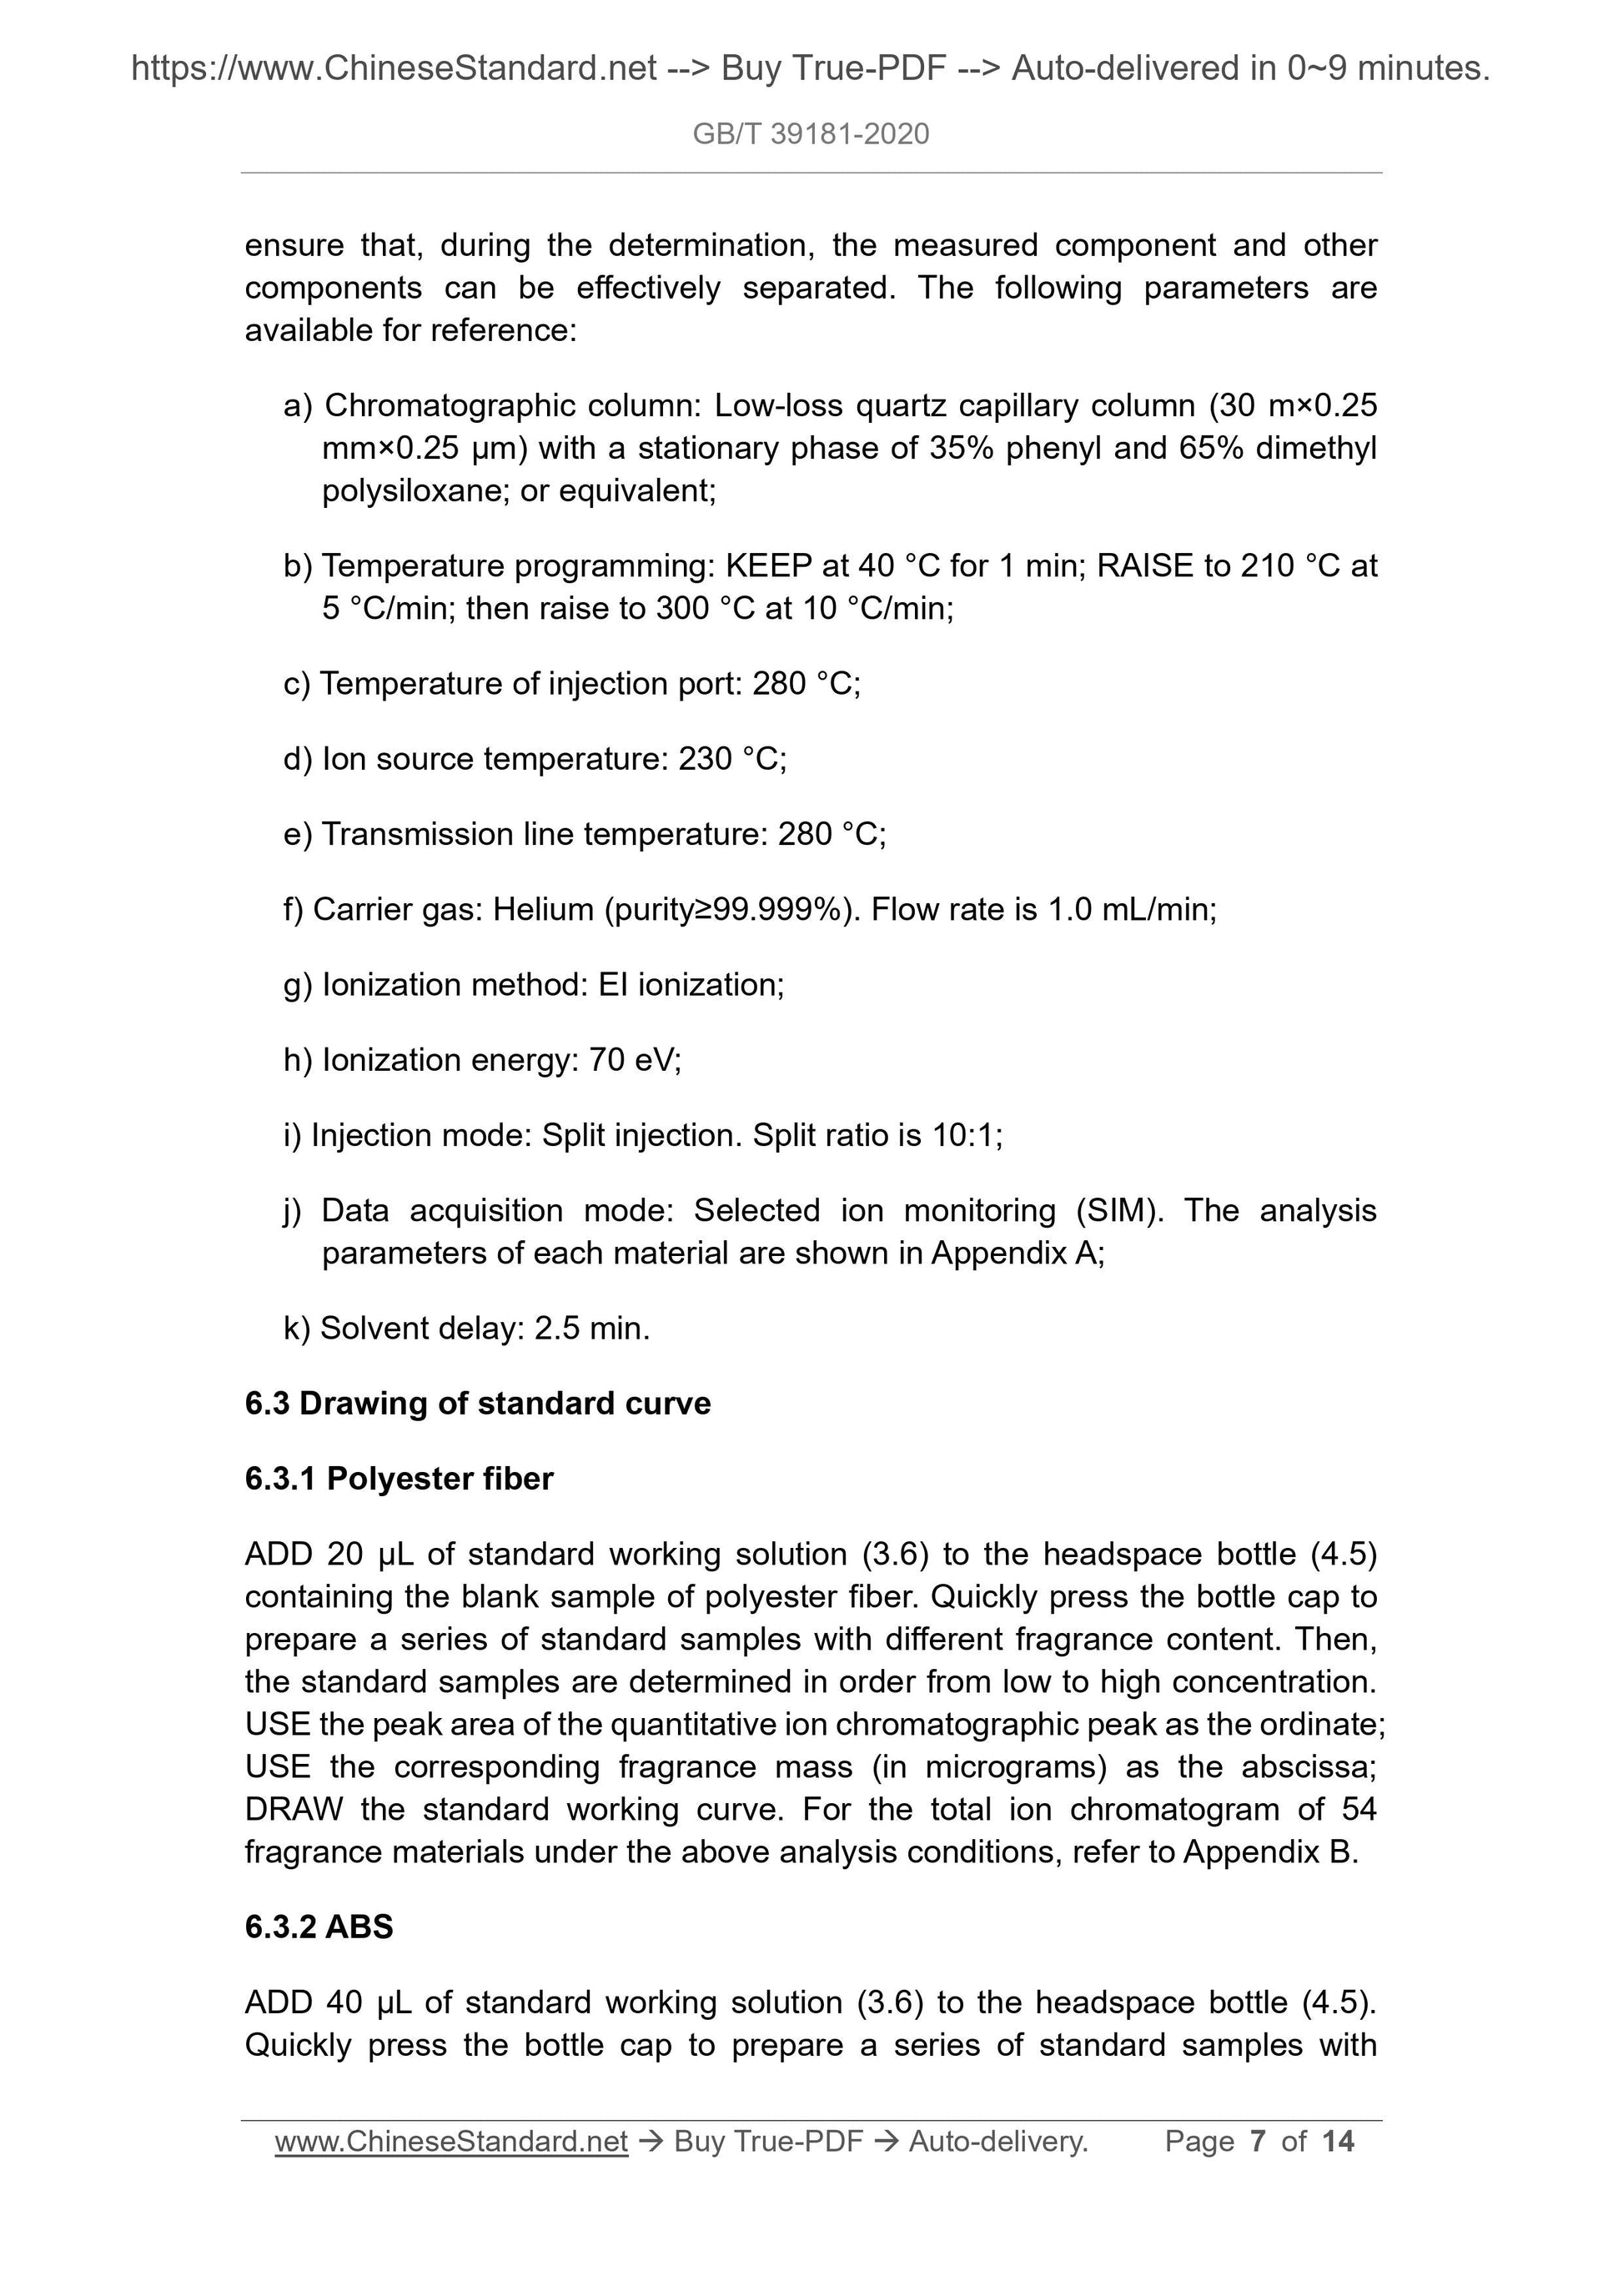 GB/T 39181-2020 Page 5